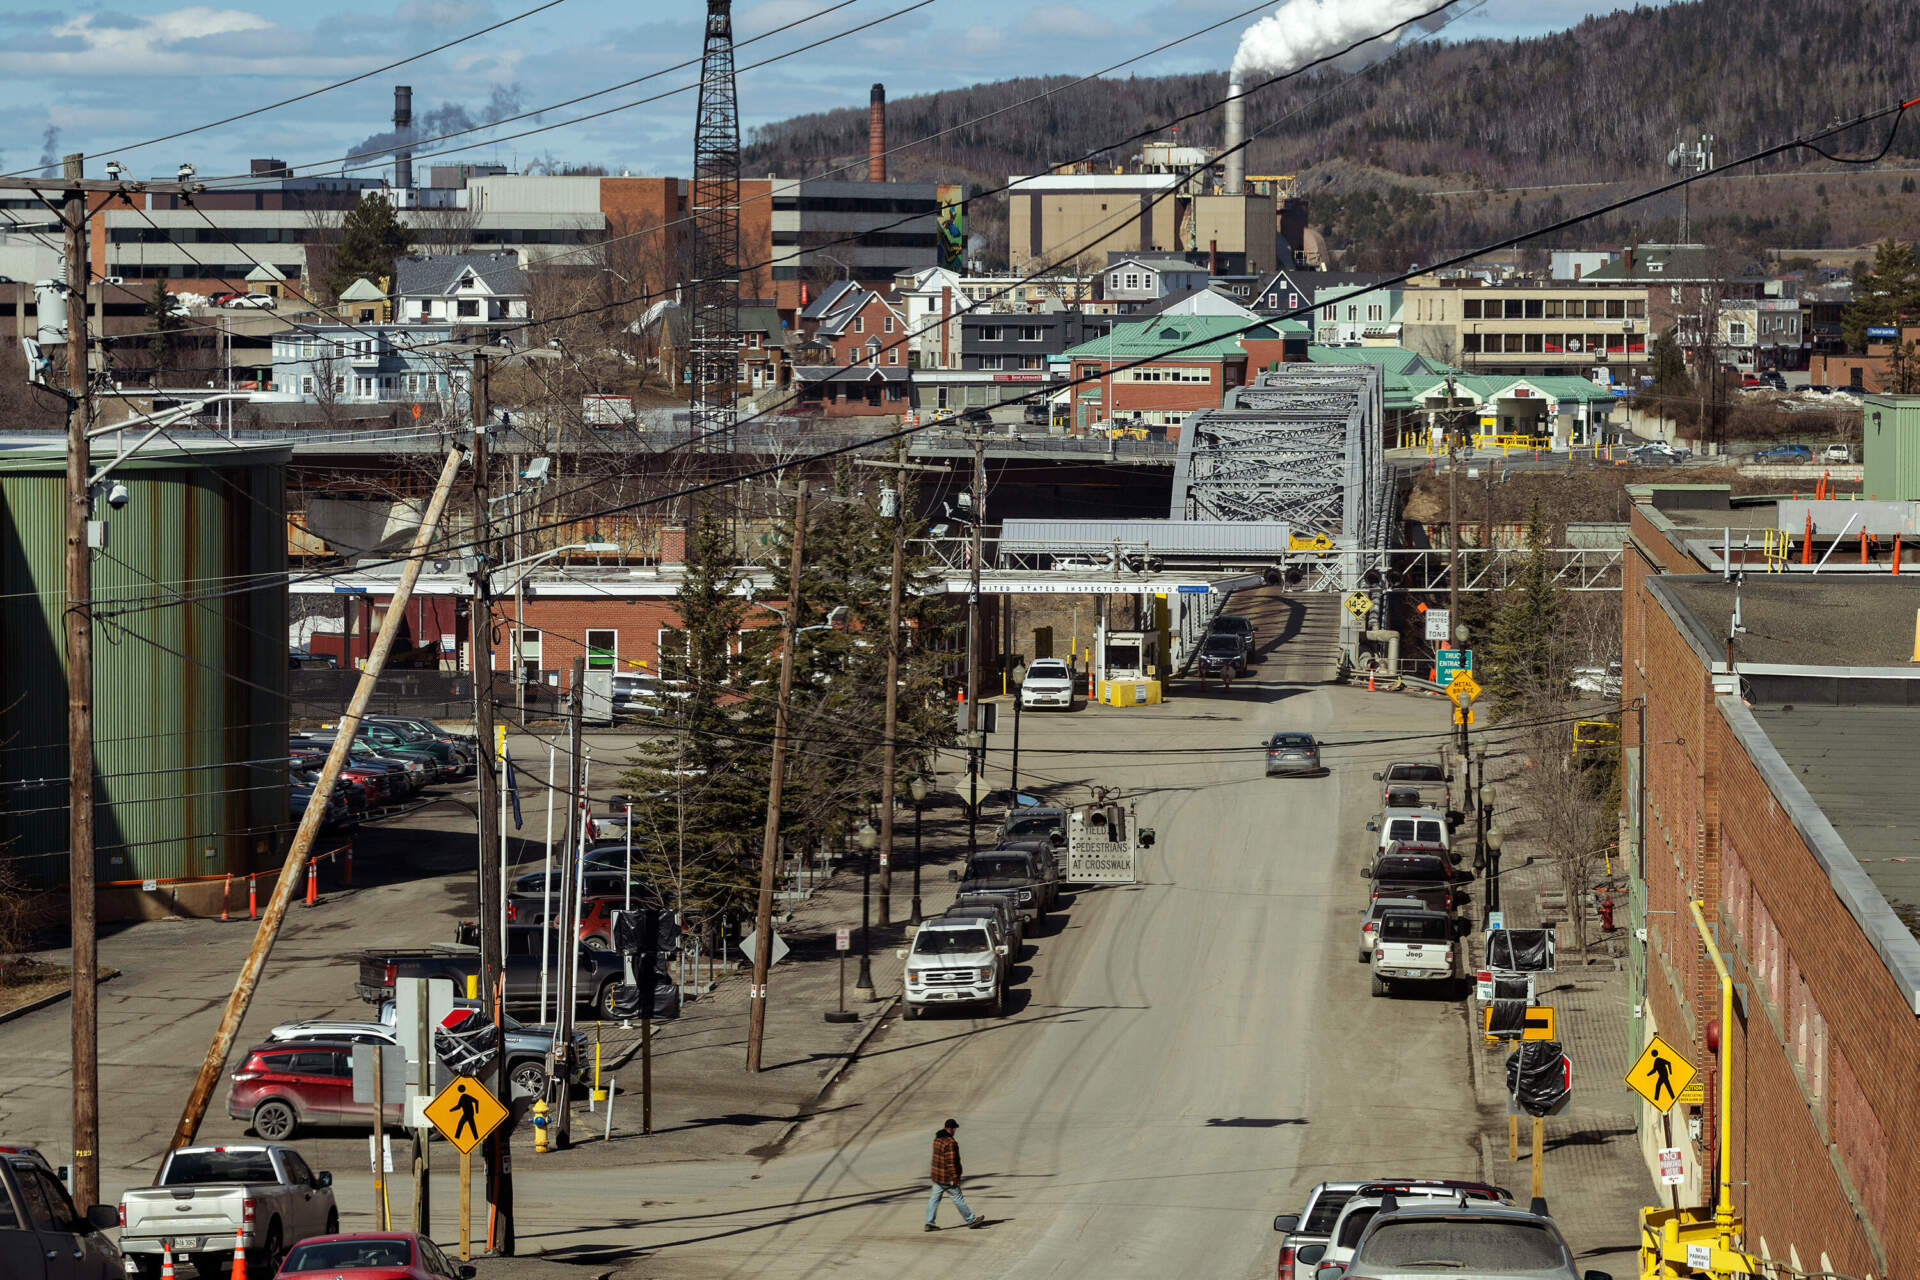 Madawaska, a mill town abutting Canada in Aroostook County. (Ashley L. Conti for The New York Times)